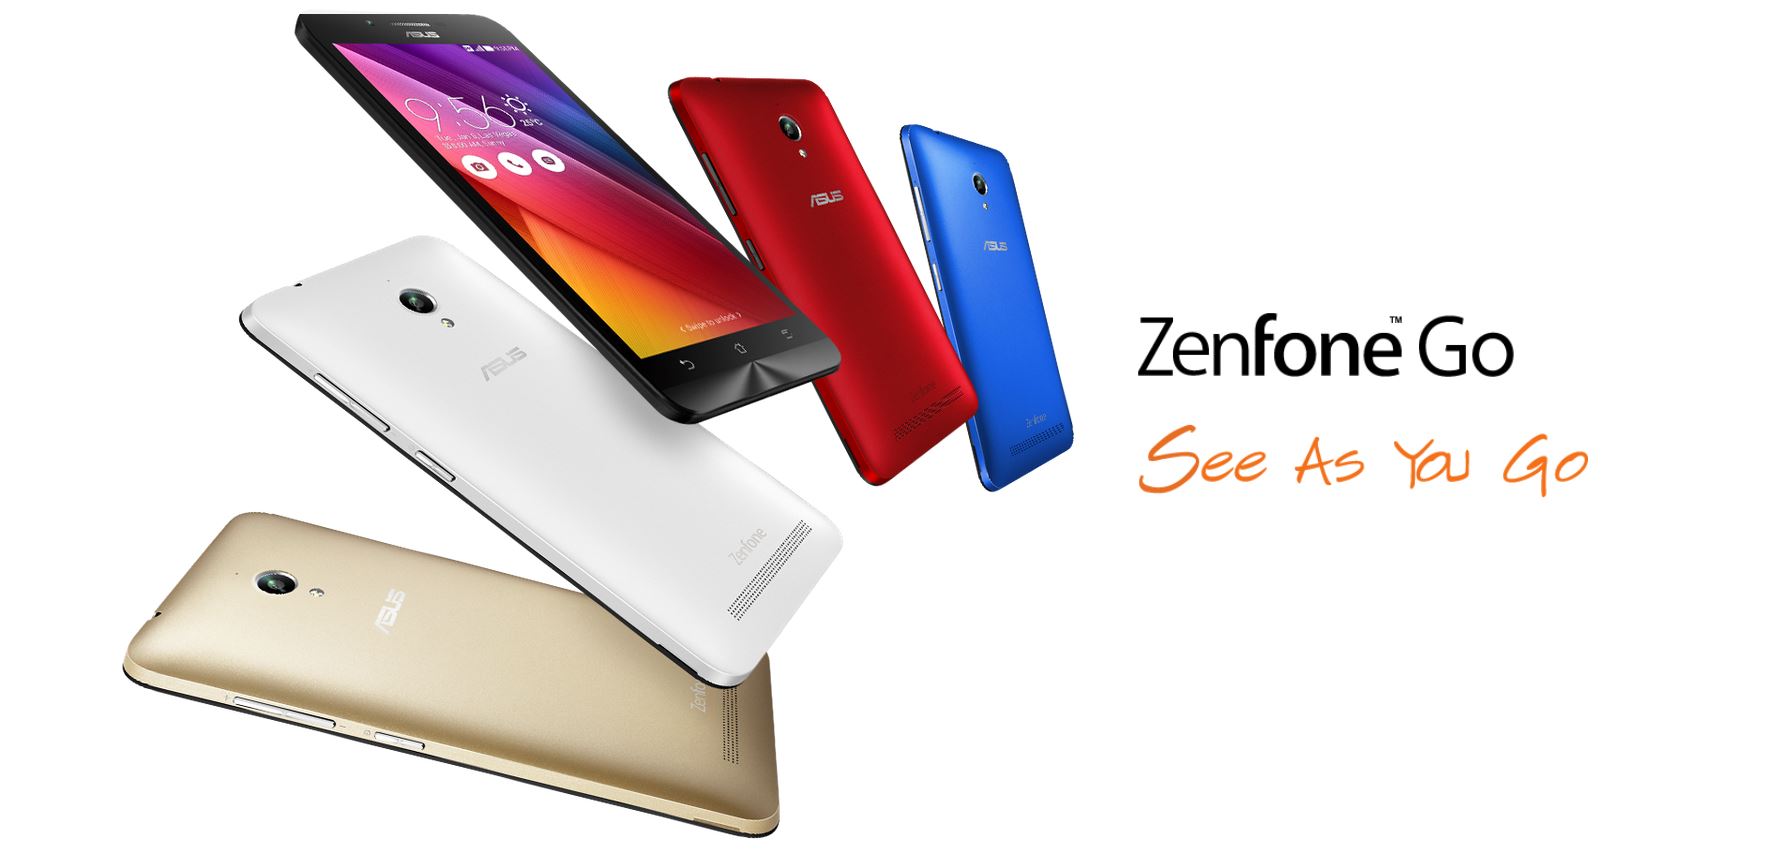 ASUS Zenfone GO is now available in ASUS MY store 29